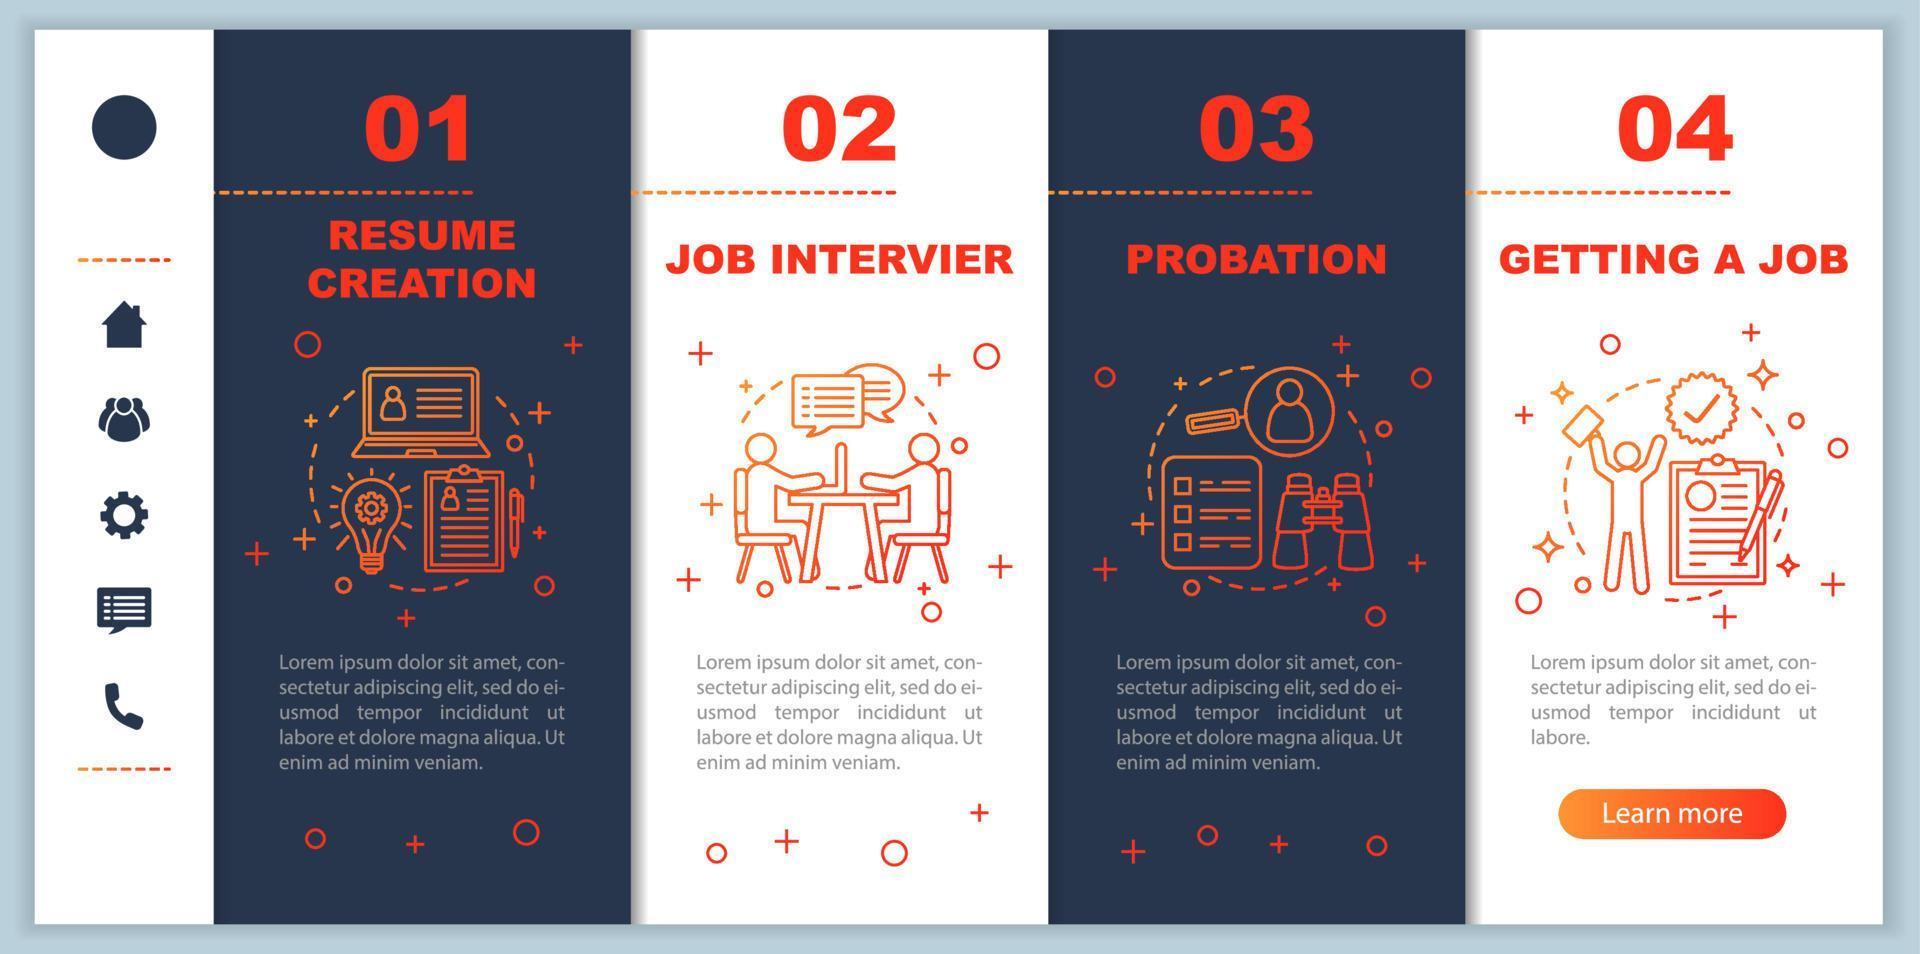 Recruitment onboarding mobile app page screen vector template. Getting job. Job interview. Job searching walkthrough website steps with linear illustrations. UX, UI, GUI smartphone interface concept